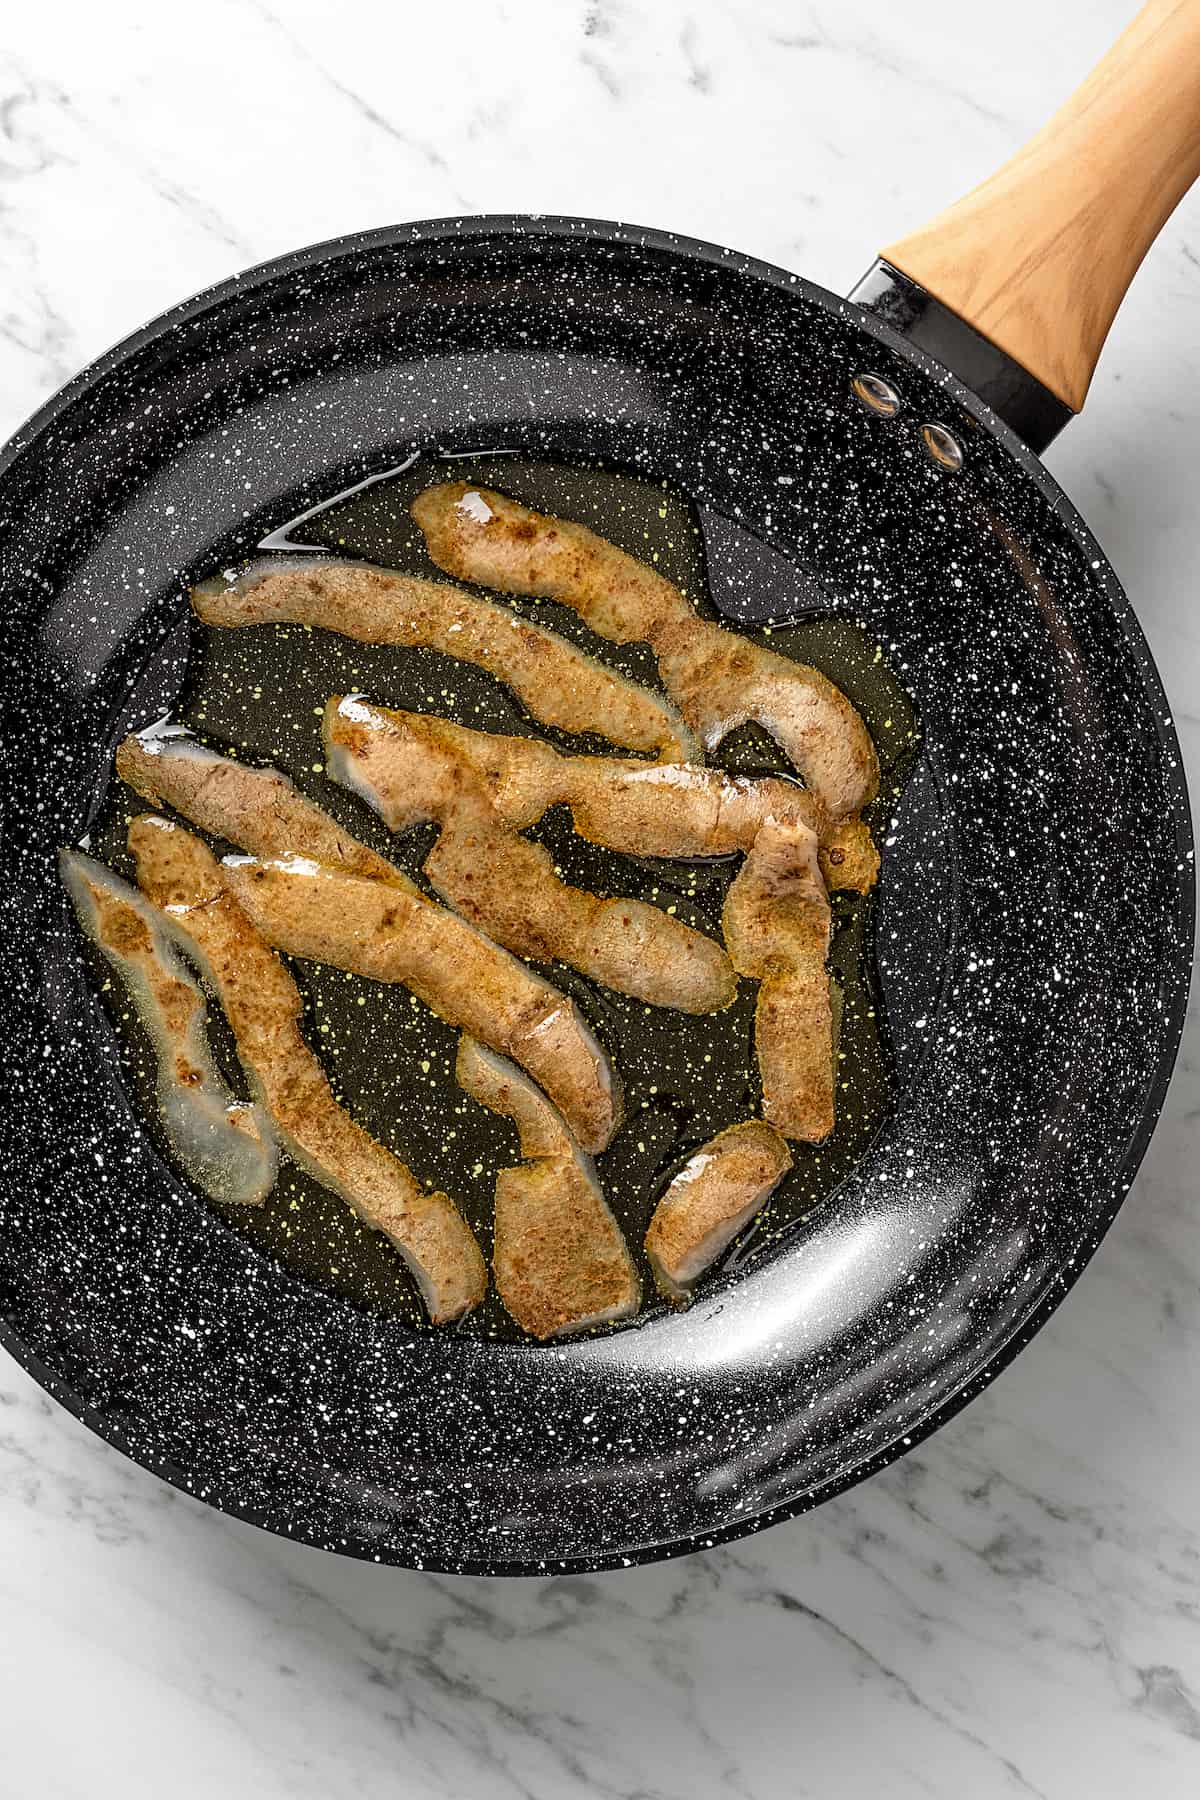 Overhead view of frying potato skins in skillet